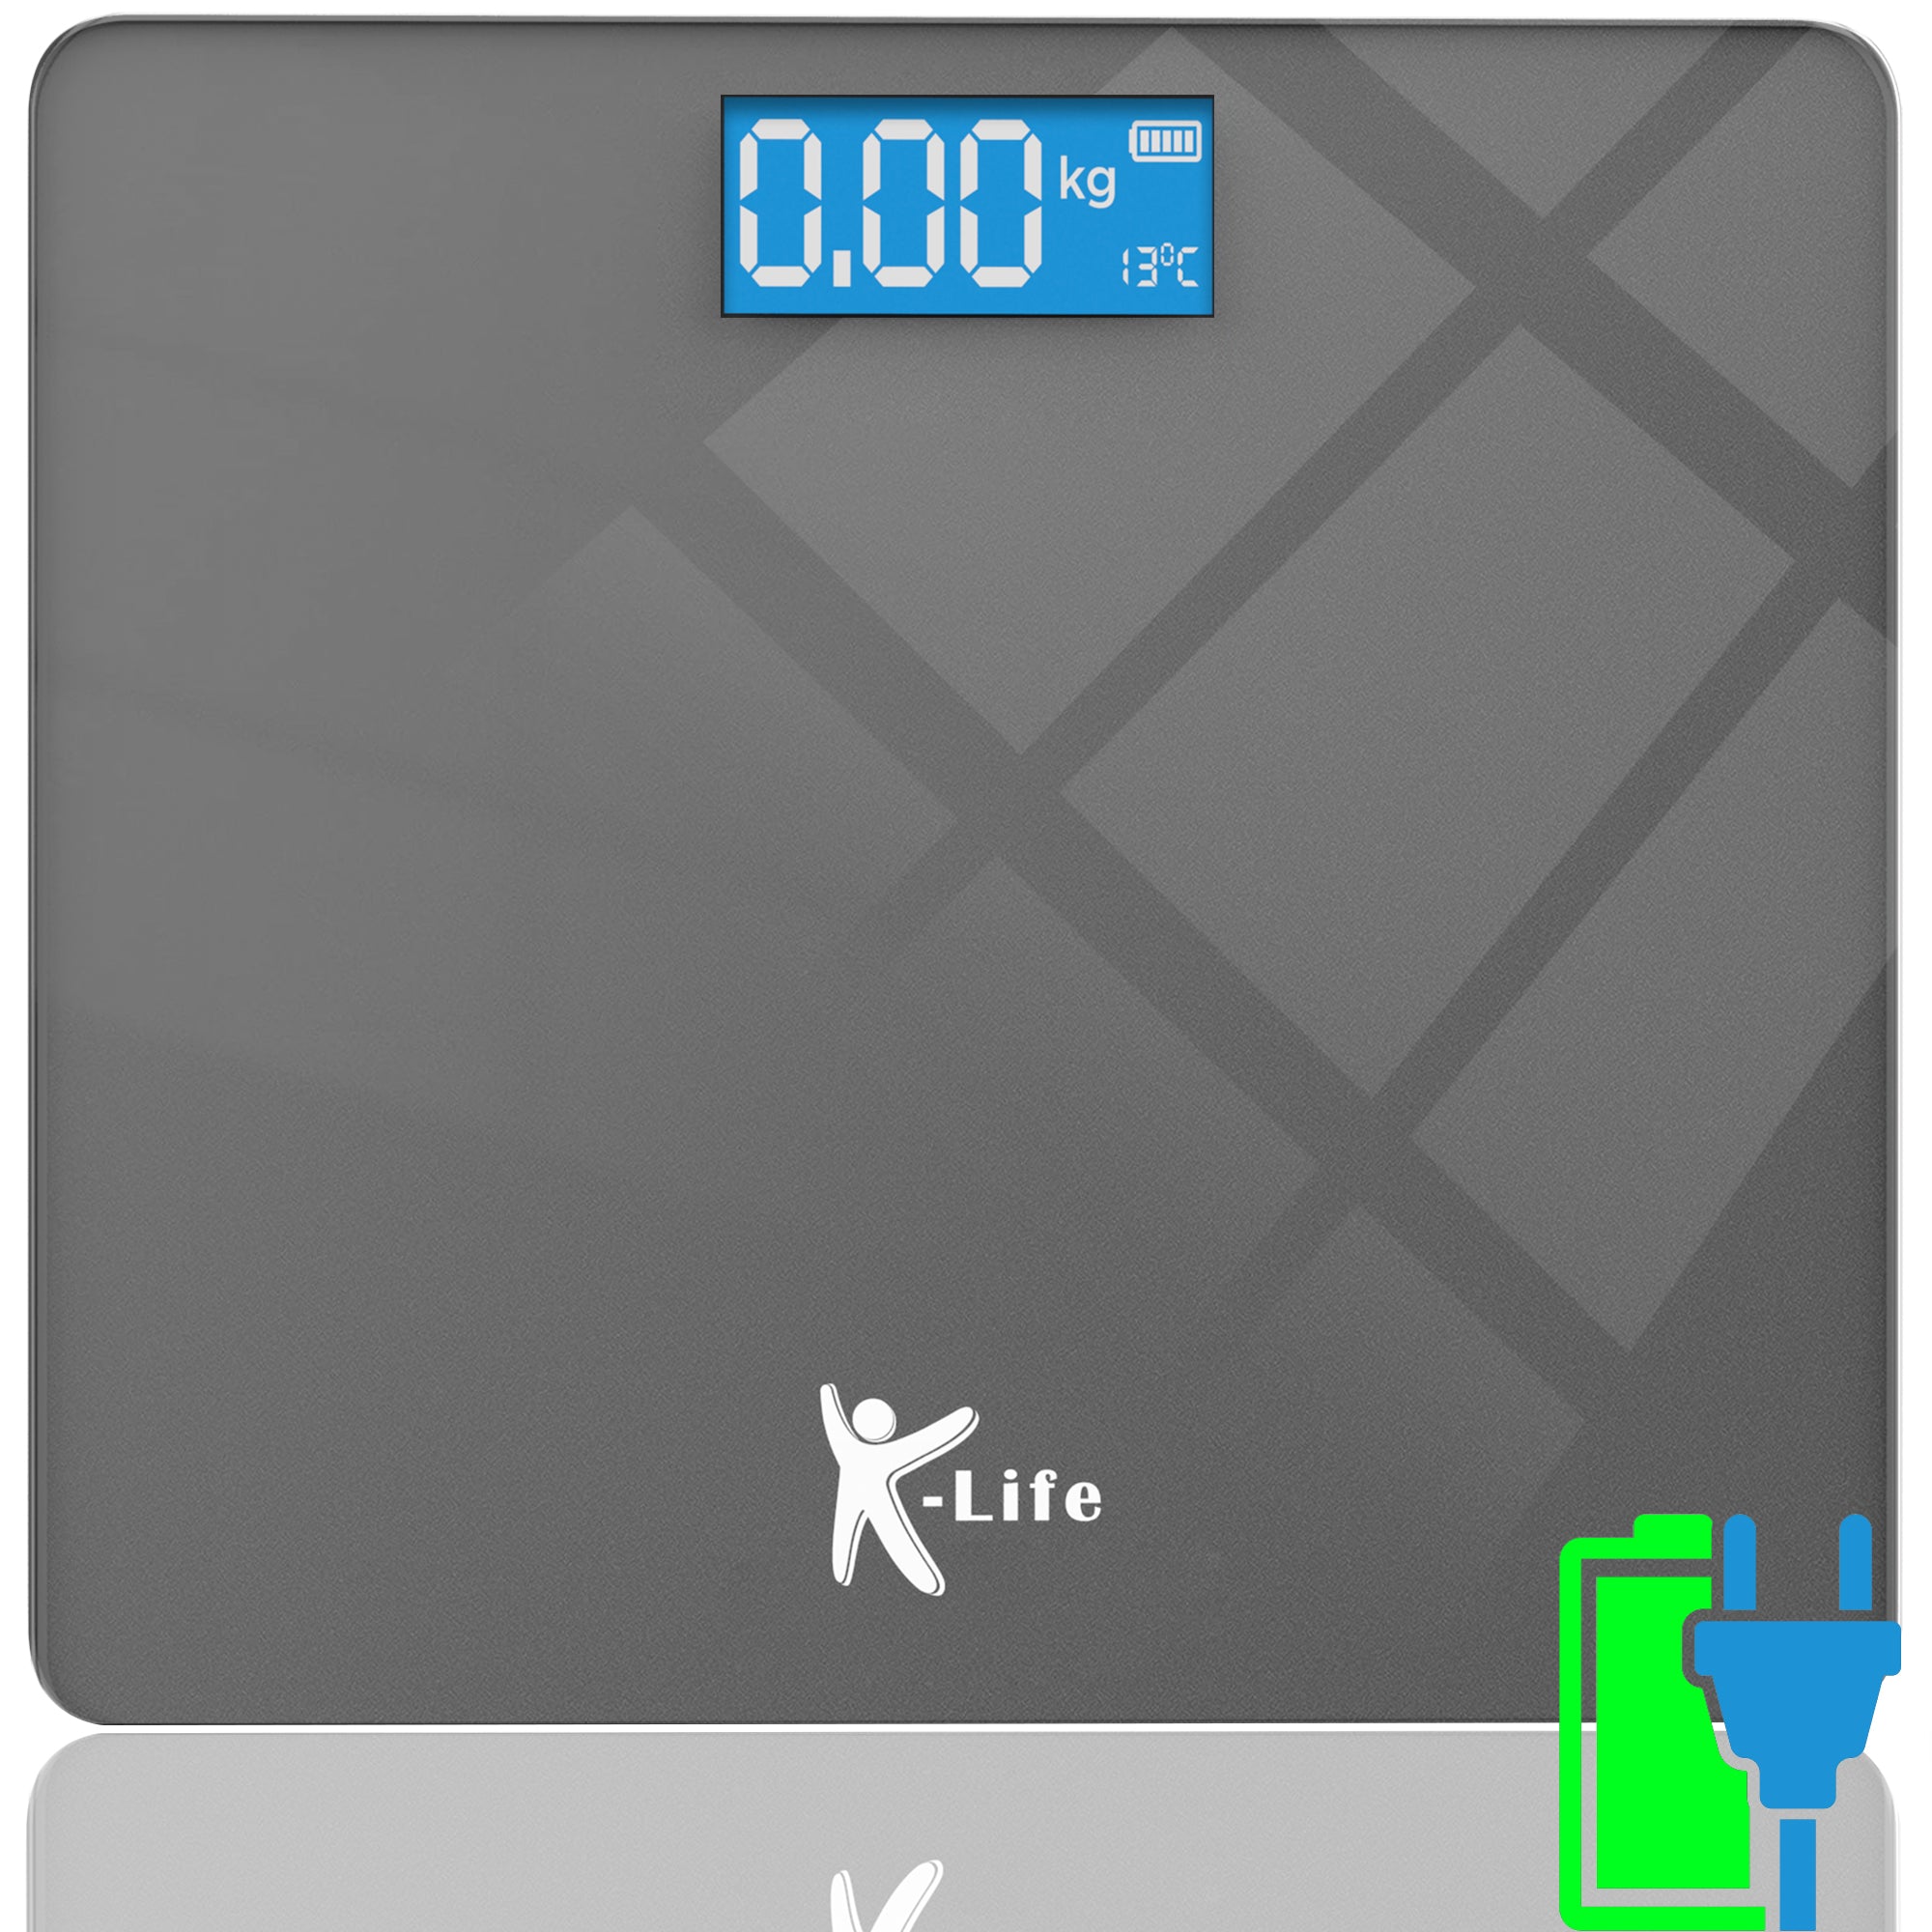 K-life WS-101B Digital Rechargeable Personal Electronic Body Weight Machine for Human Body 180kg Capacity Weighing Scale (Grey)